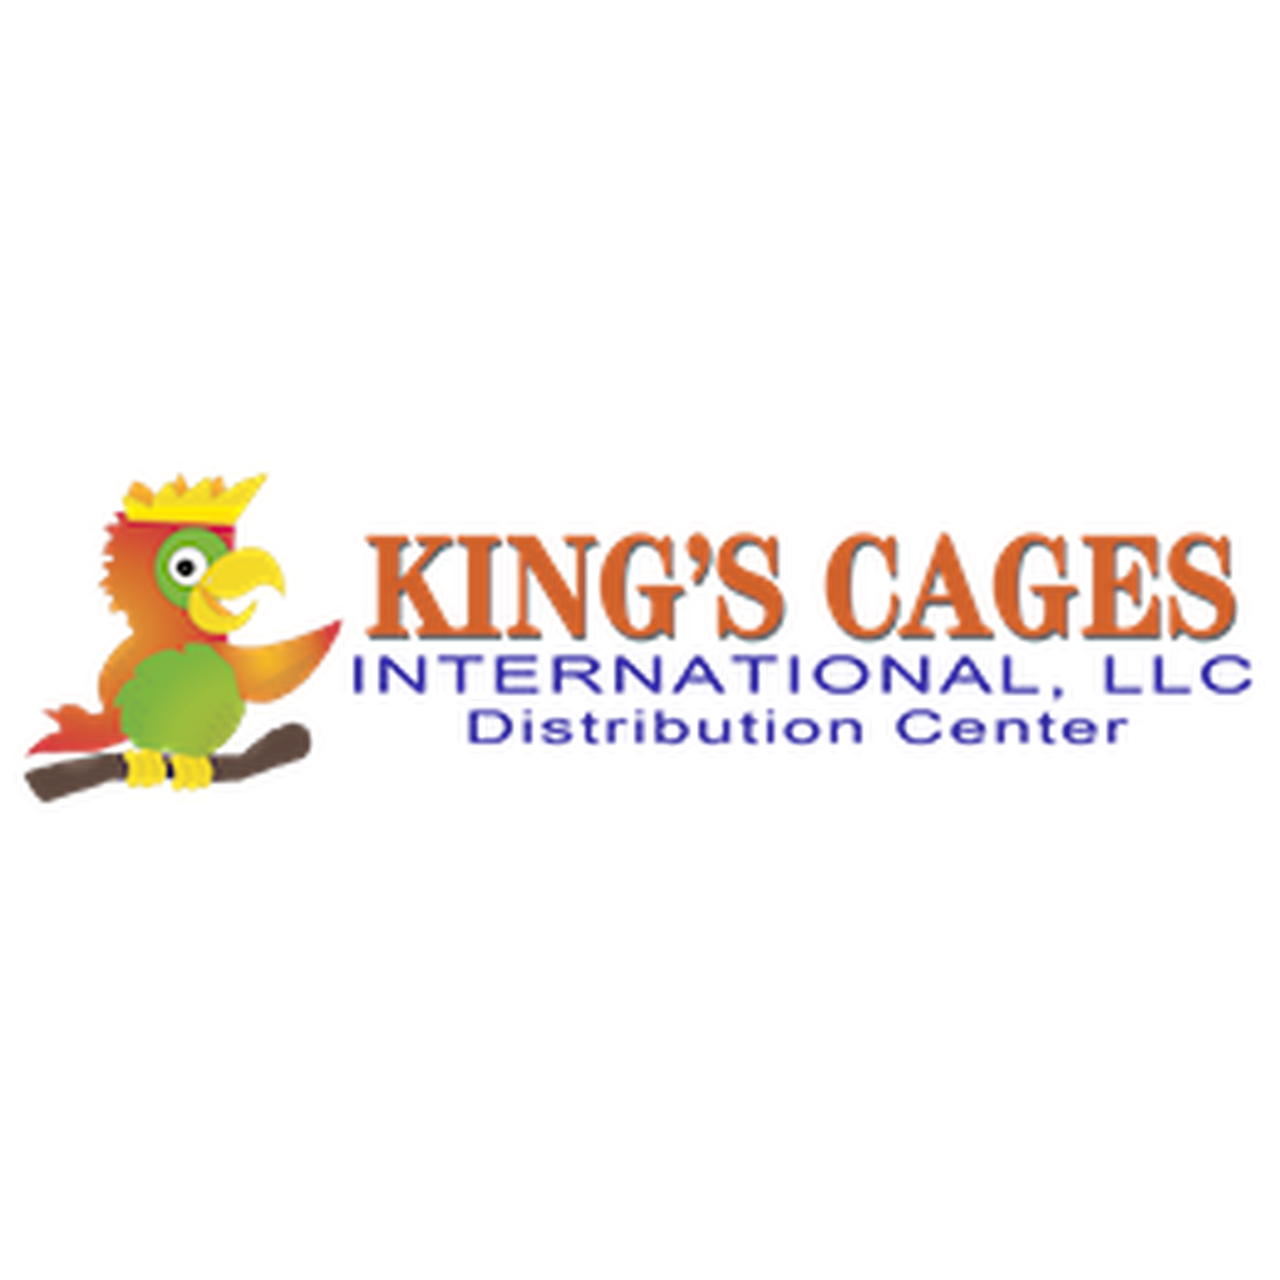 King's Cages, every time! Long-lasting, durable and safe bird cages are the only types of cages you will find here. - Lady Gouldian Finch Supplies